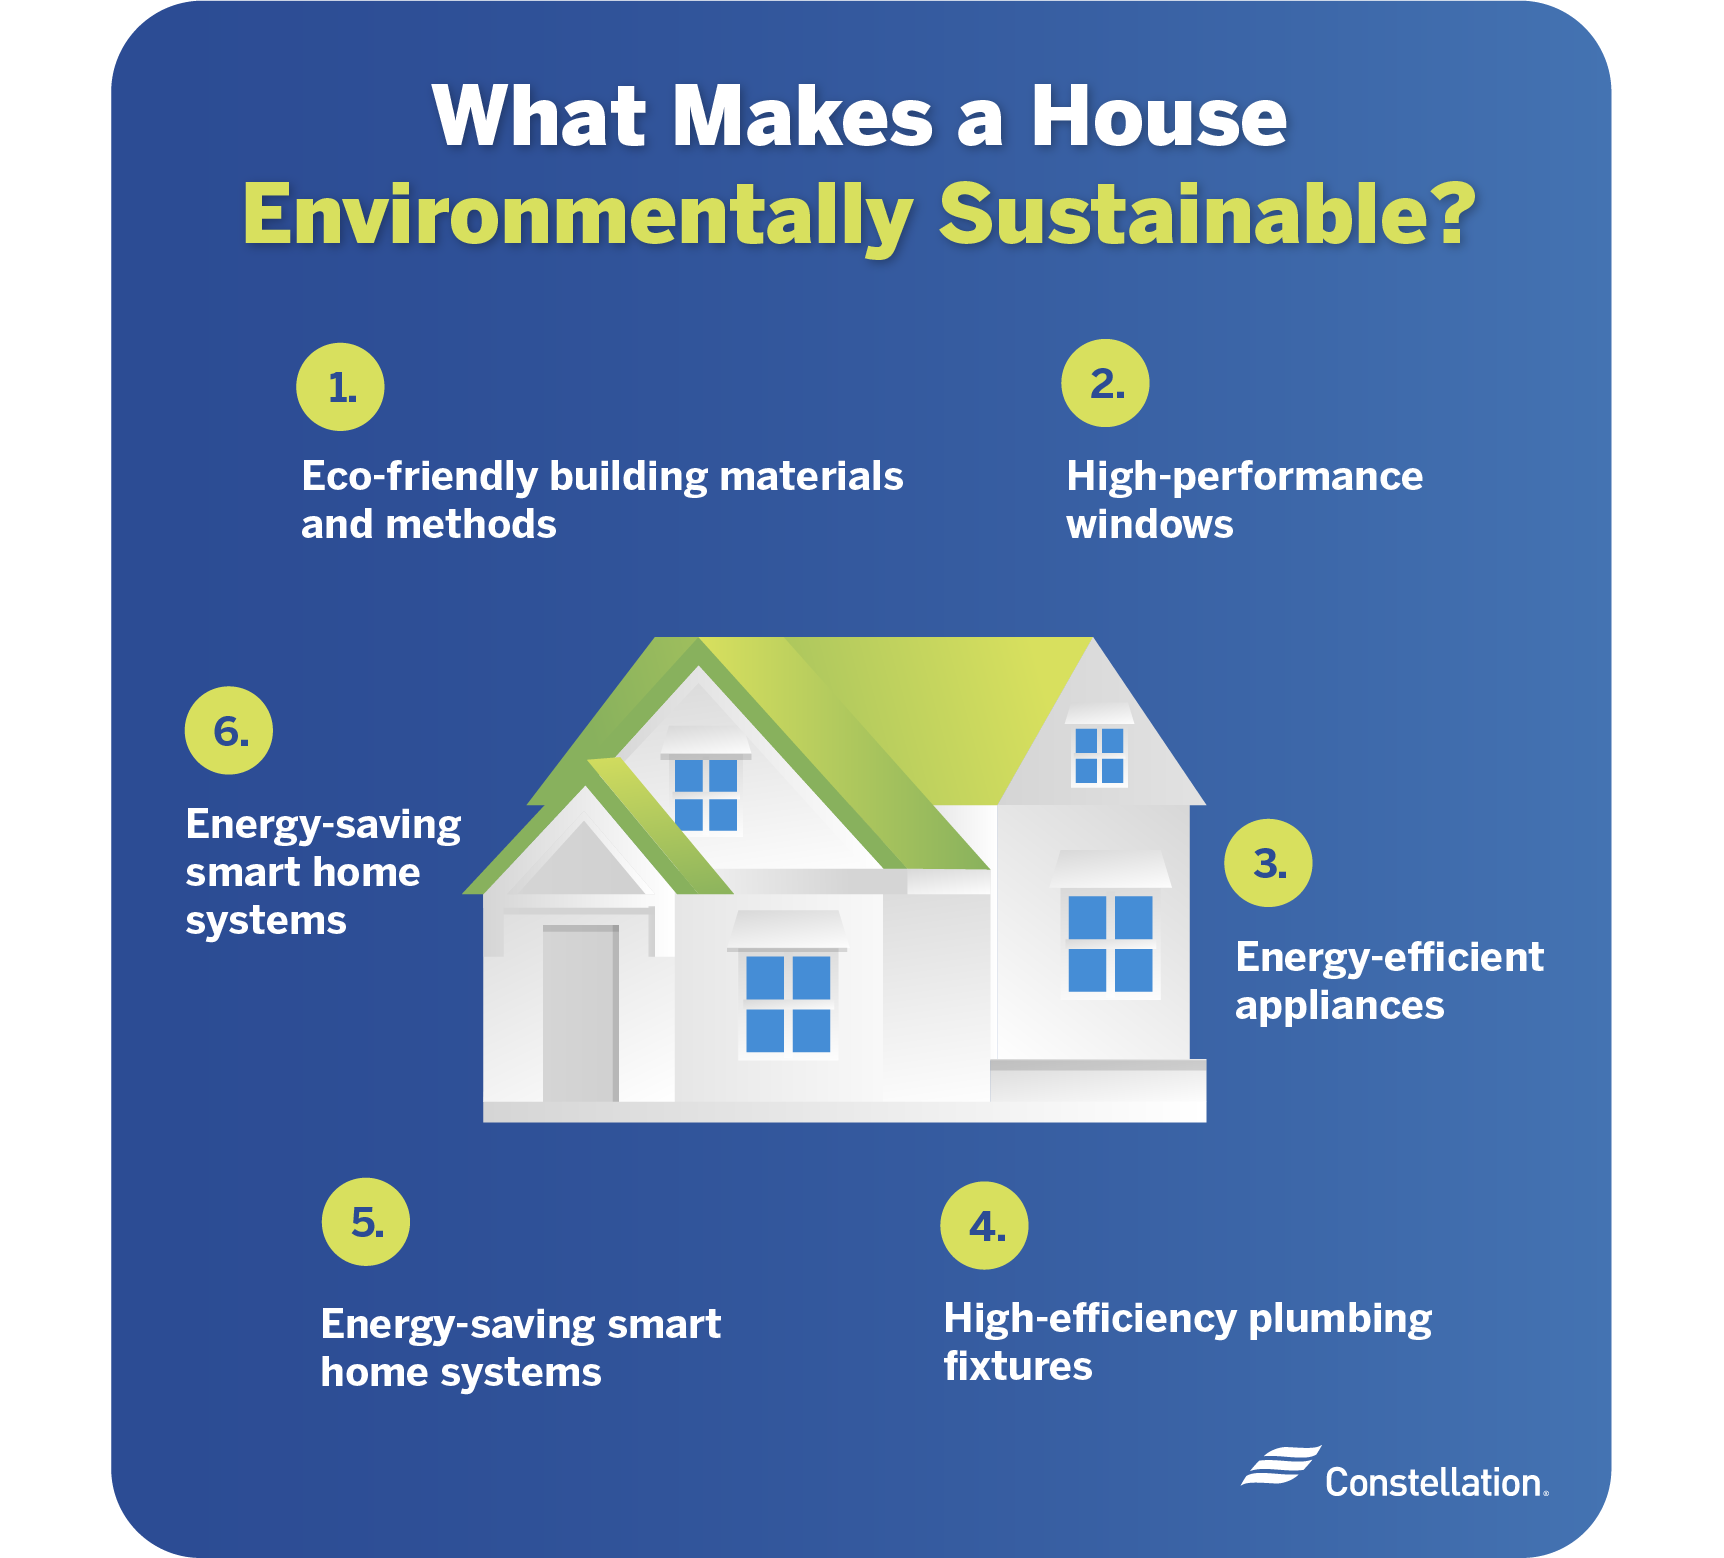 What makes a house environmentally sustainable?